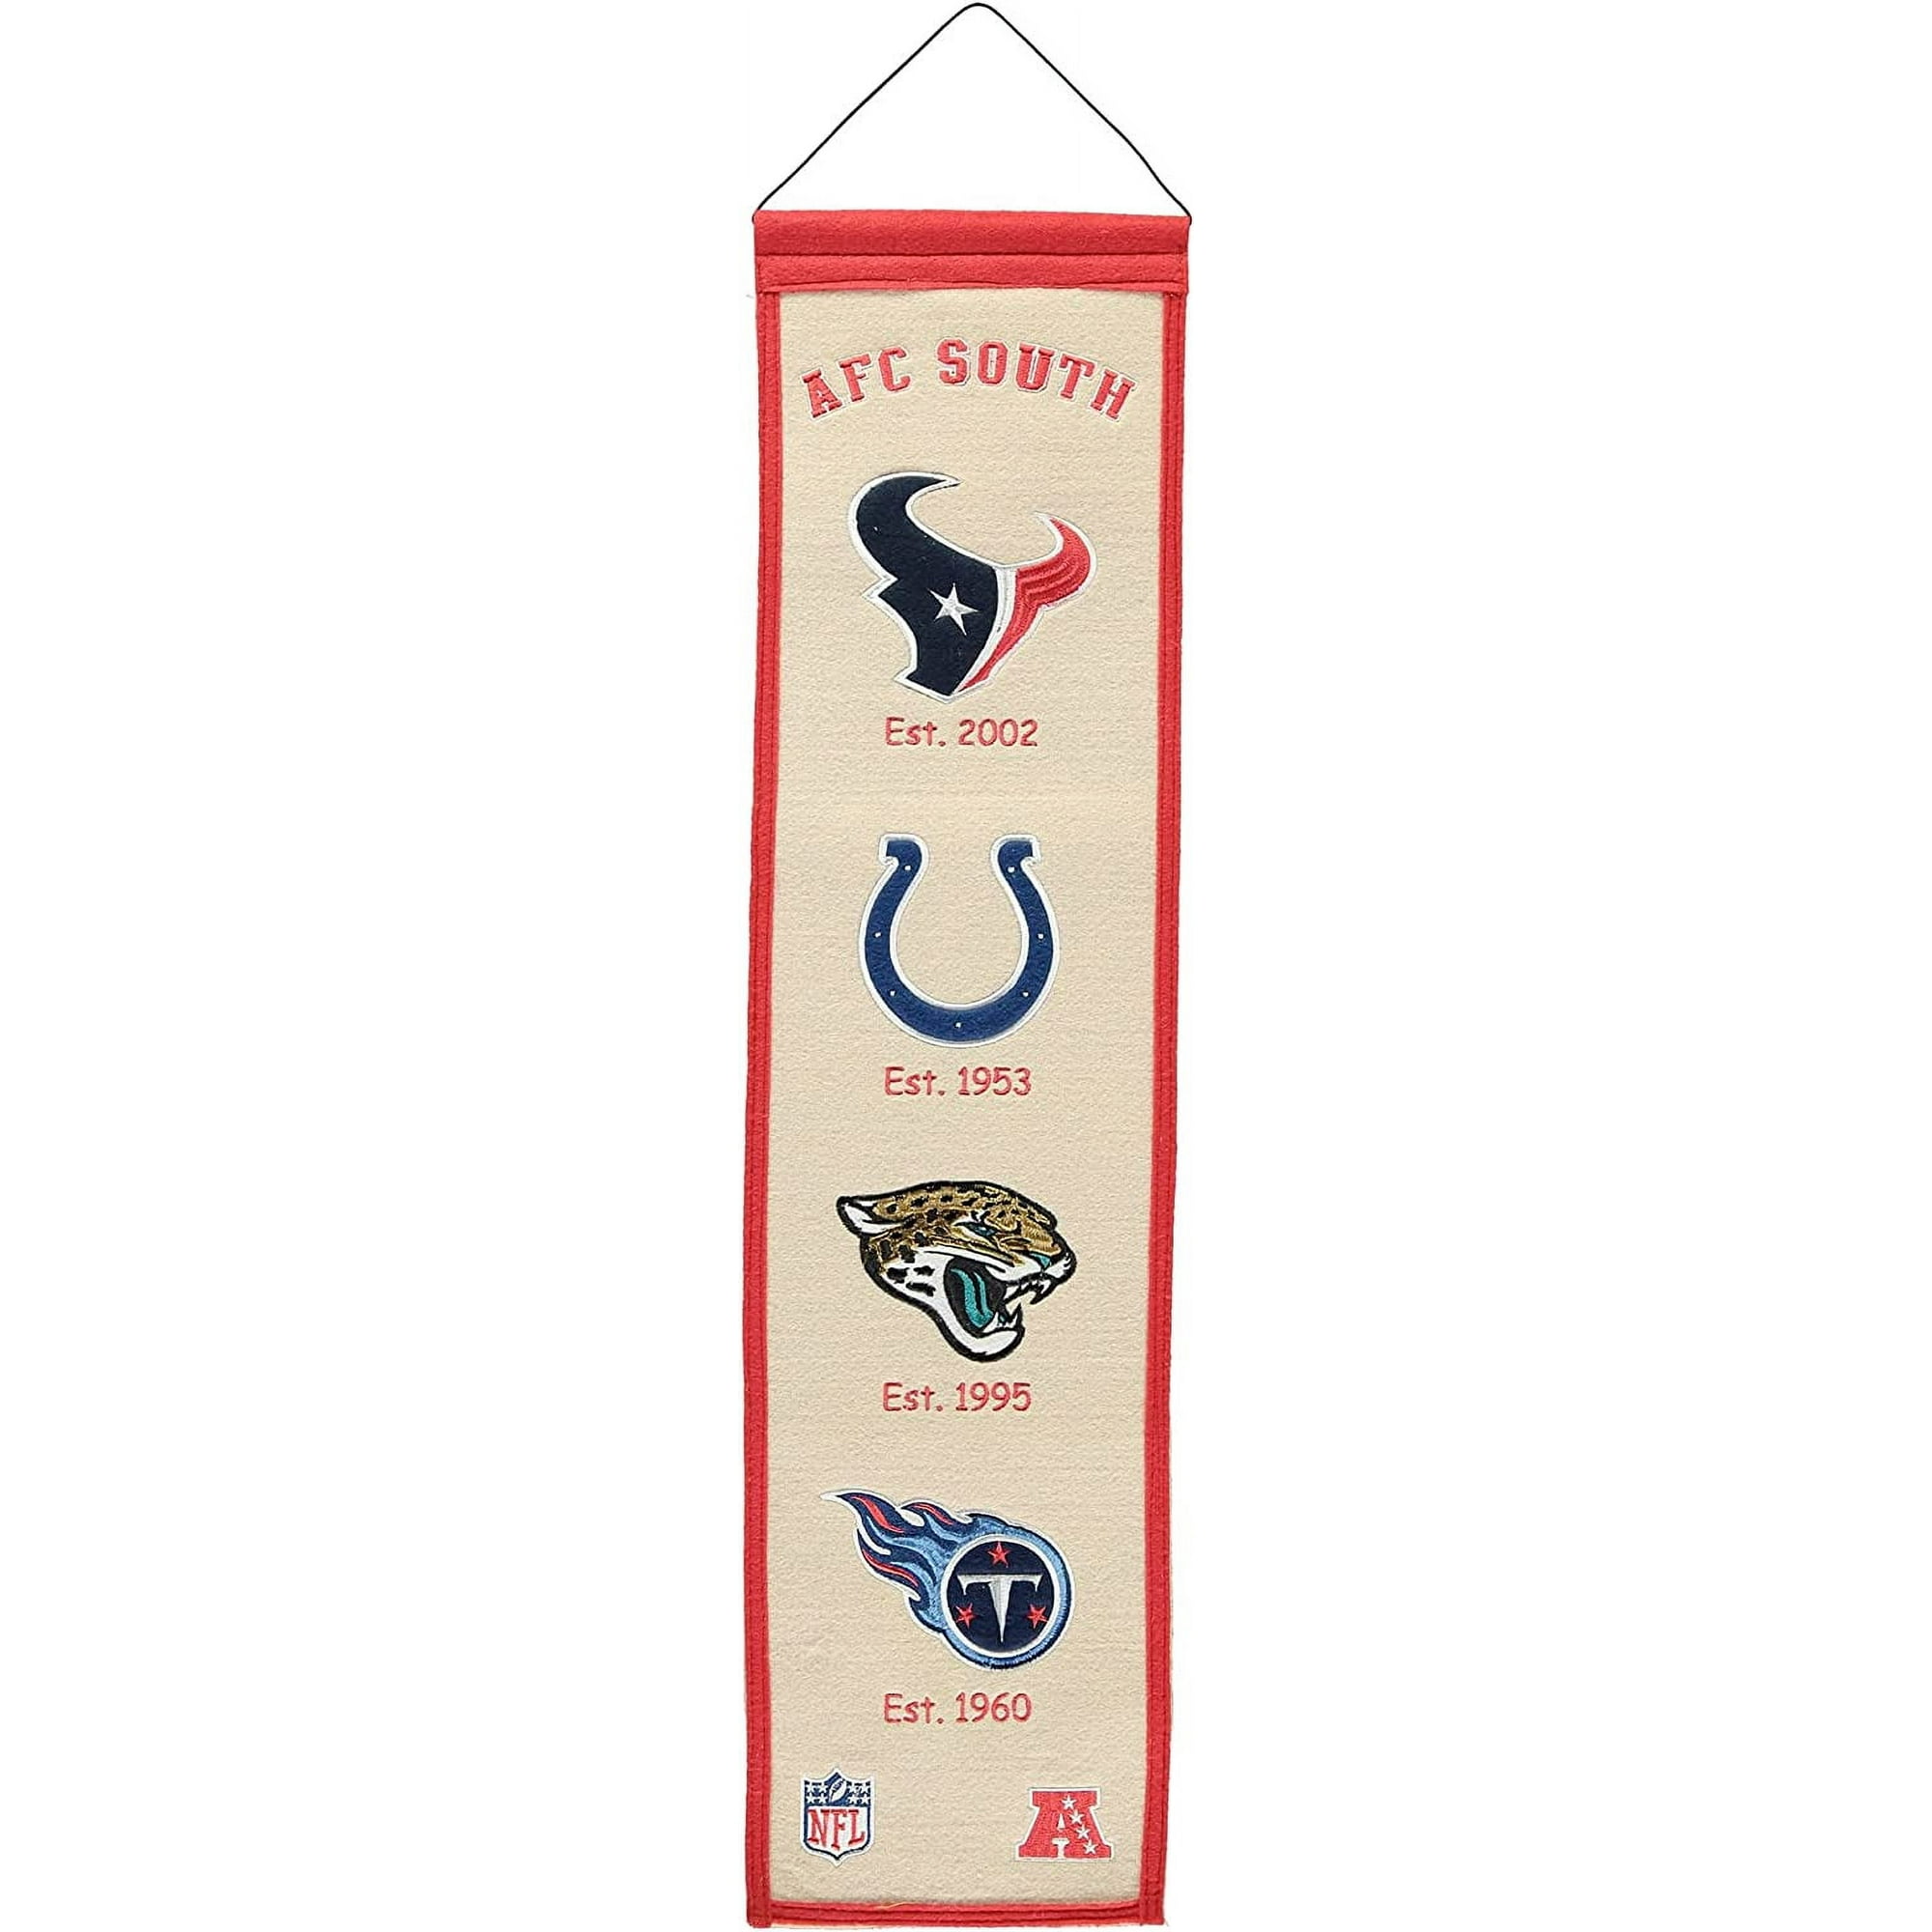 AFC South Division Rivalry Heritage Banner - Featuring Texans + Colts +  Jaguars + Titans 